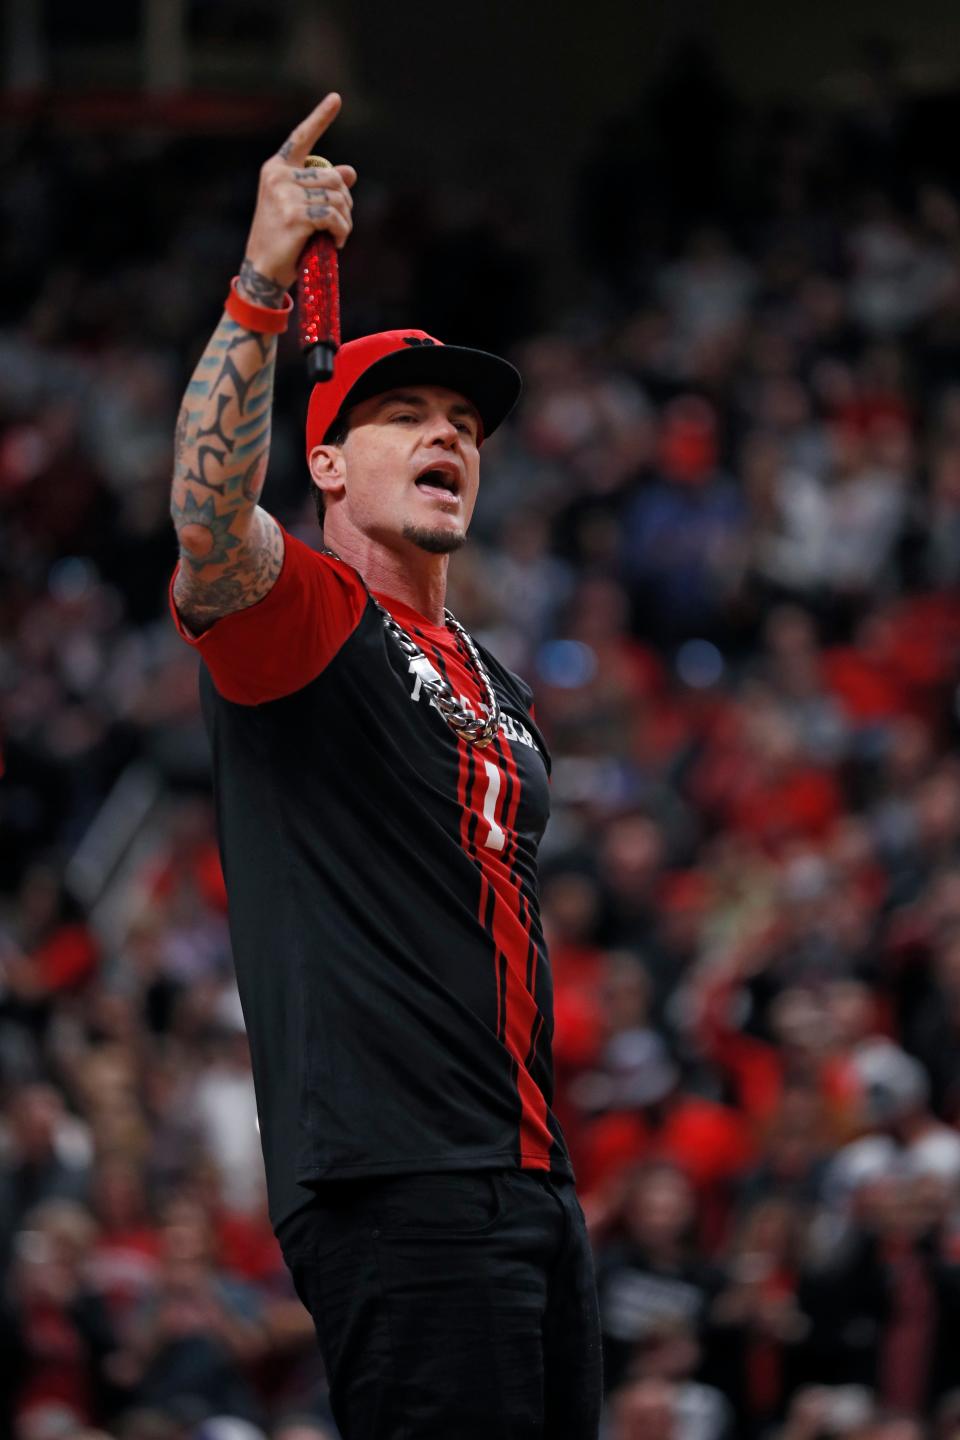 Vanilla Ice performs on stage during halftime of an NCAA college basketball game between Texas Tech and Iowa State, Saturday, Jan. 18, 2020, in Lubbock, Texas. (AP Photo/Brad Tollefson)